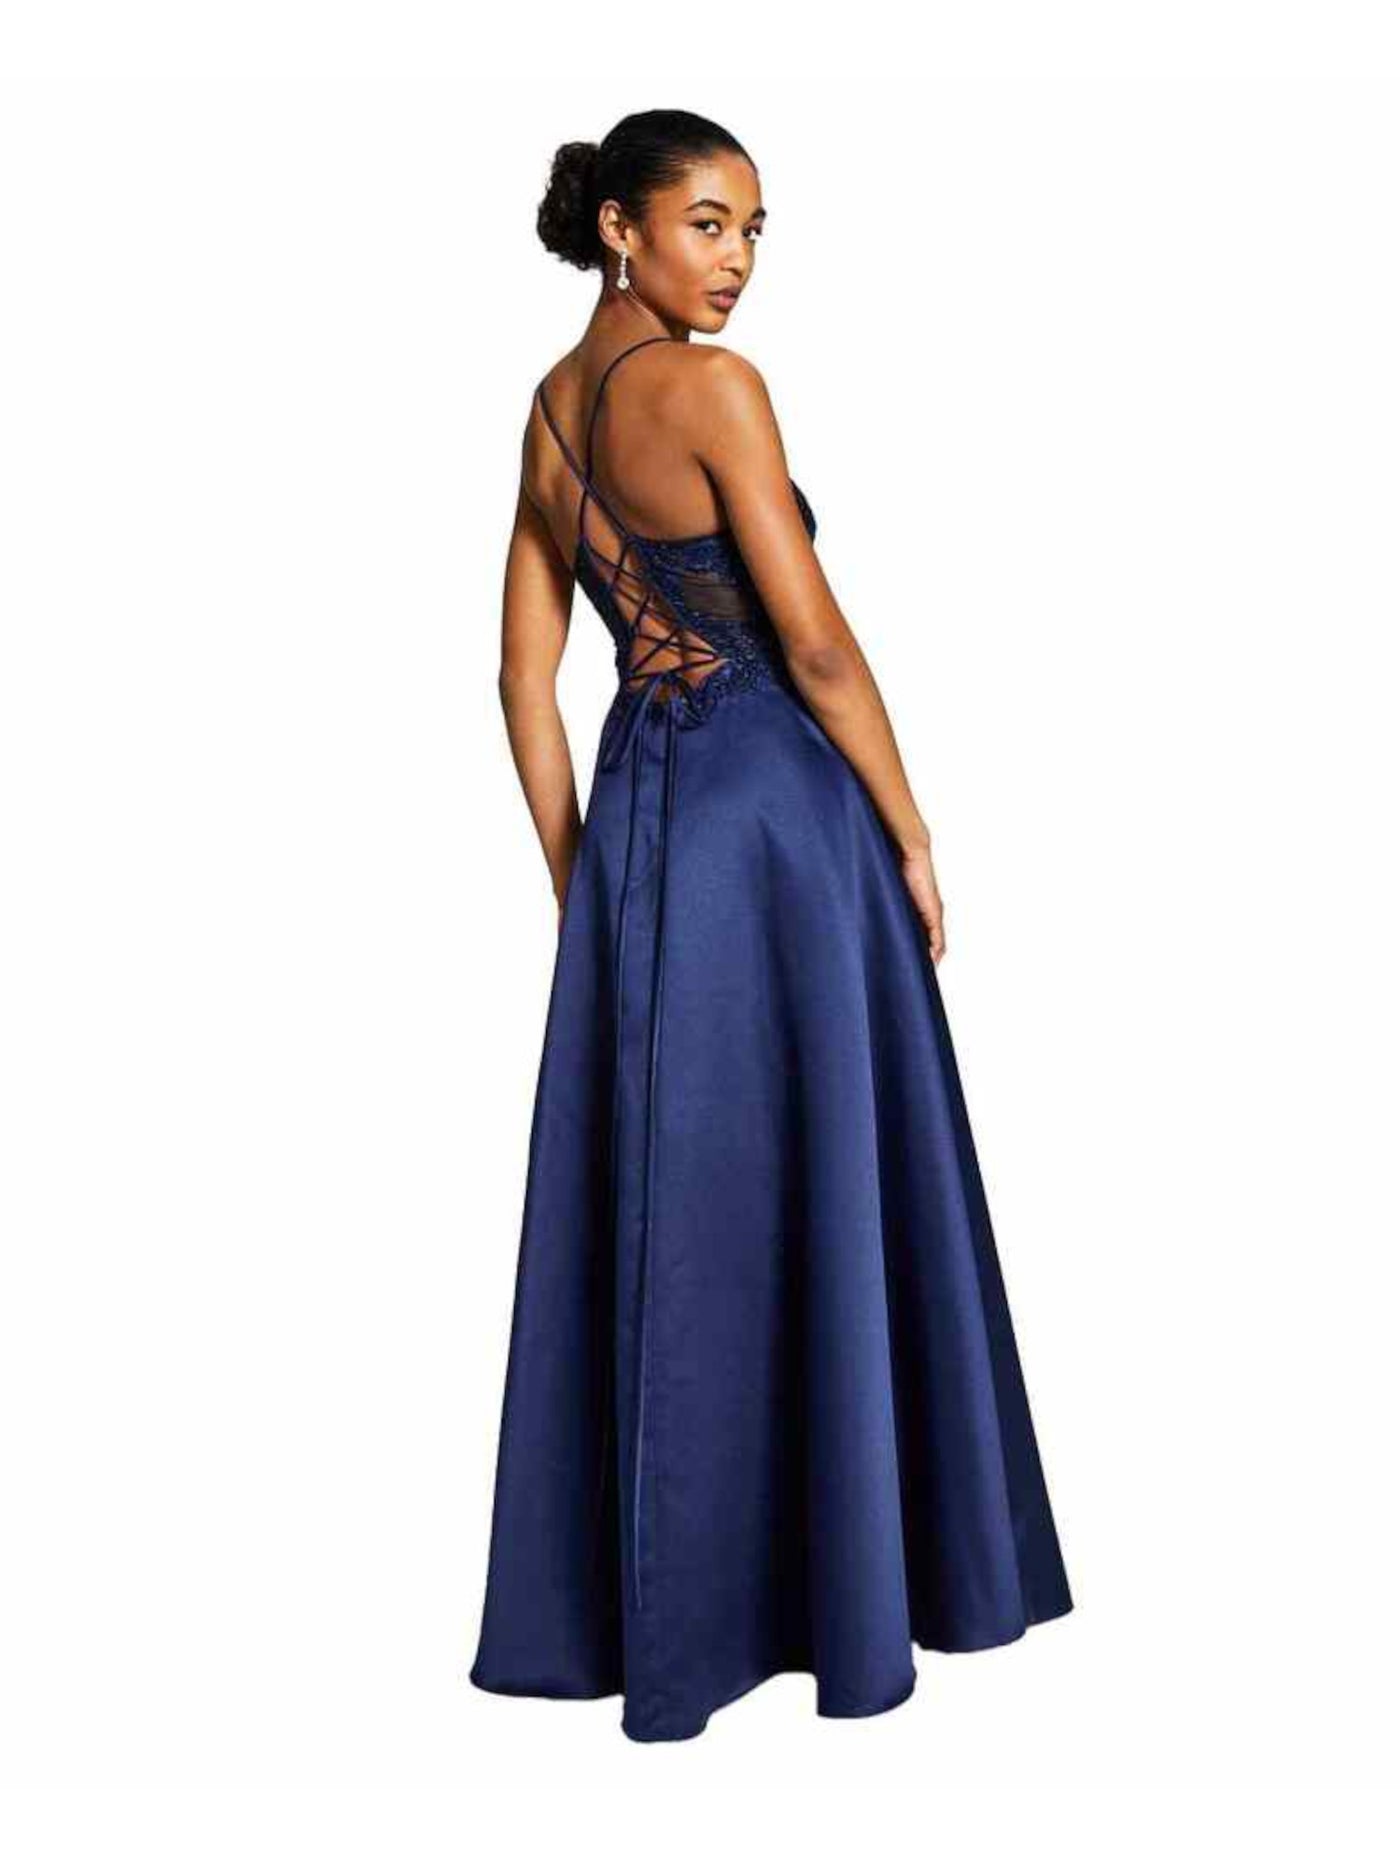 BLONDIE Womens Navy Zippered Rhinestone Lace Up Back Padded Slit Floral Spaghetti Strap Sweetheart Neckline Full-Length Formal Gown Dress Juniors 1